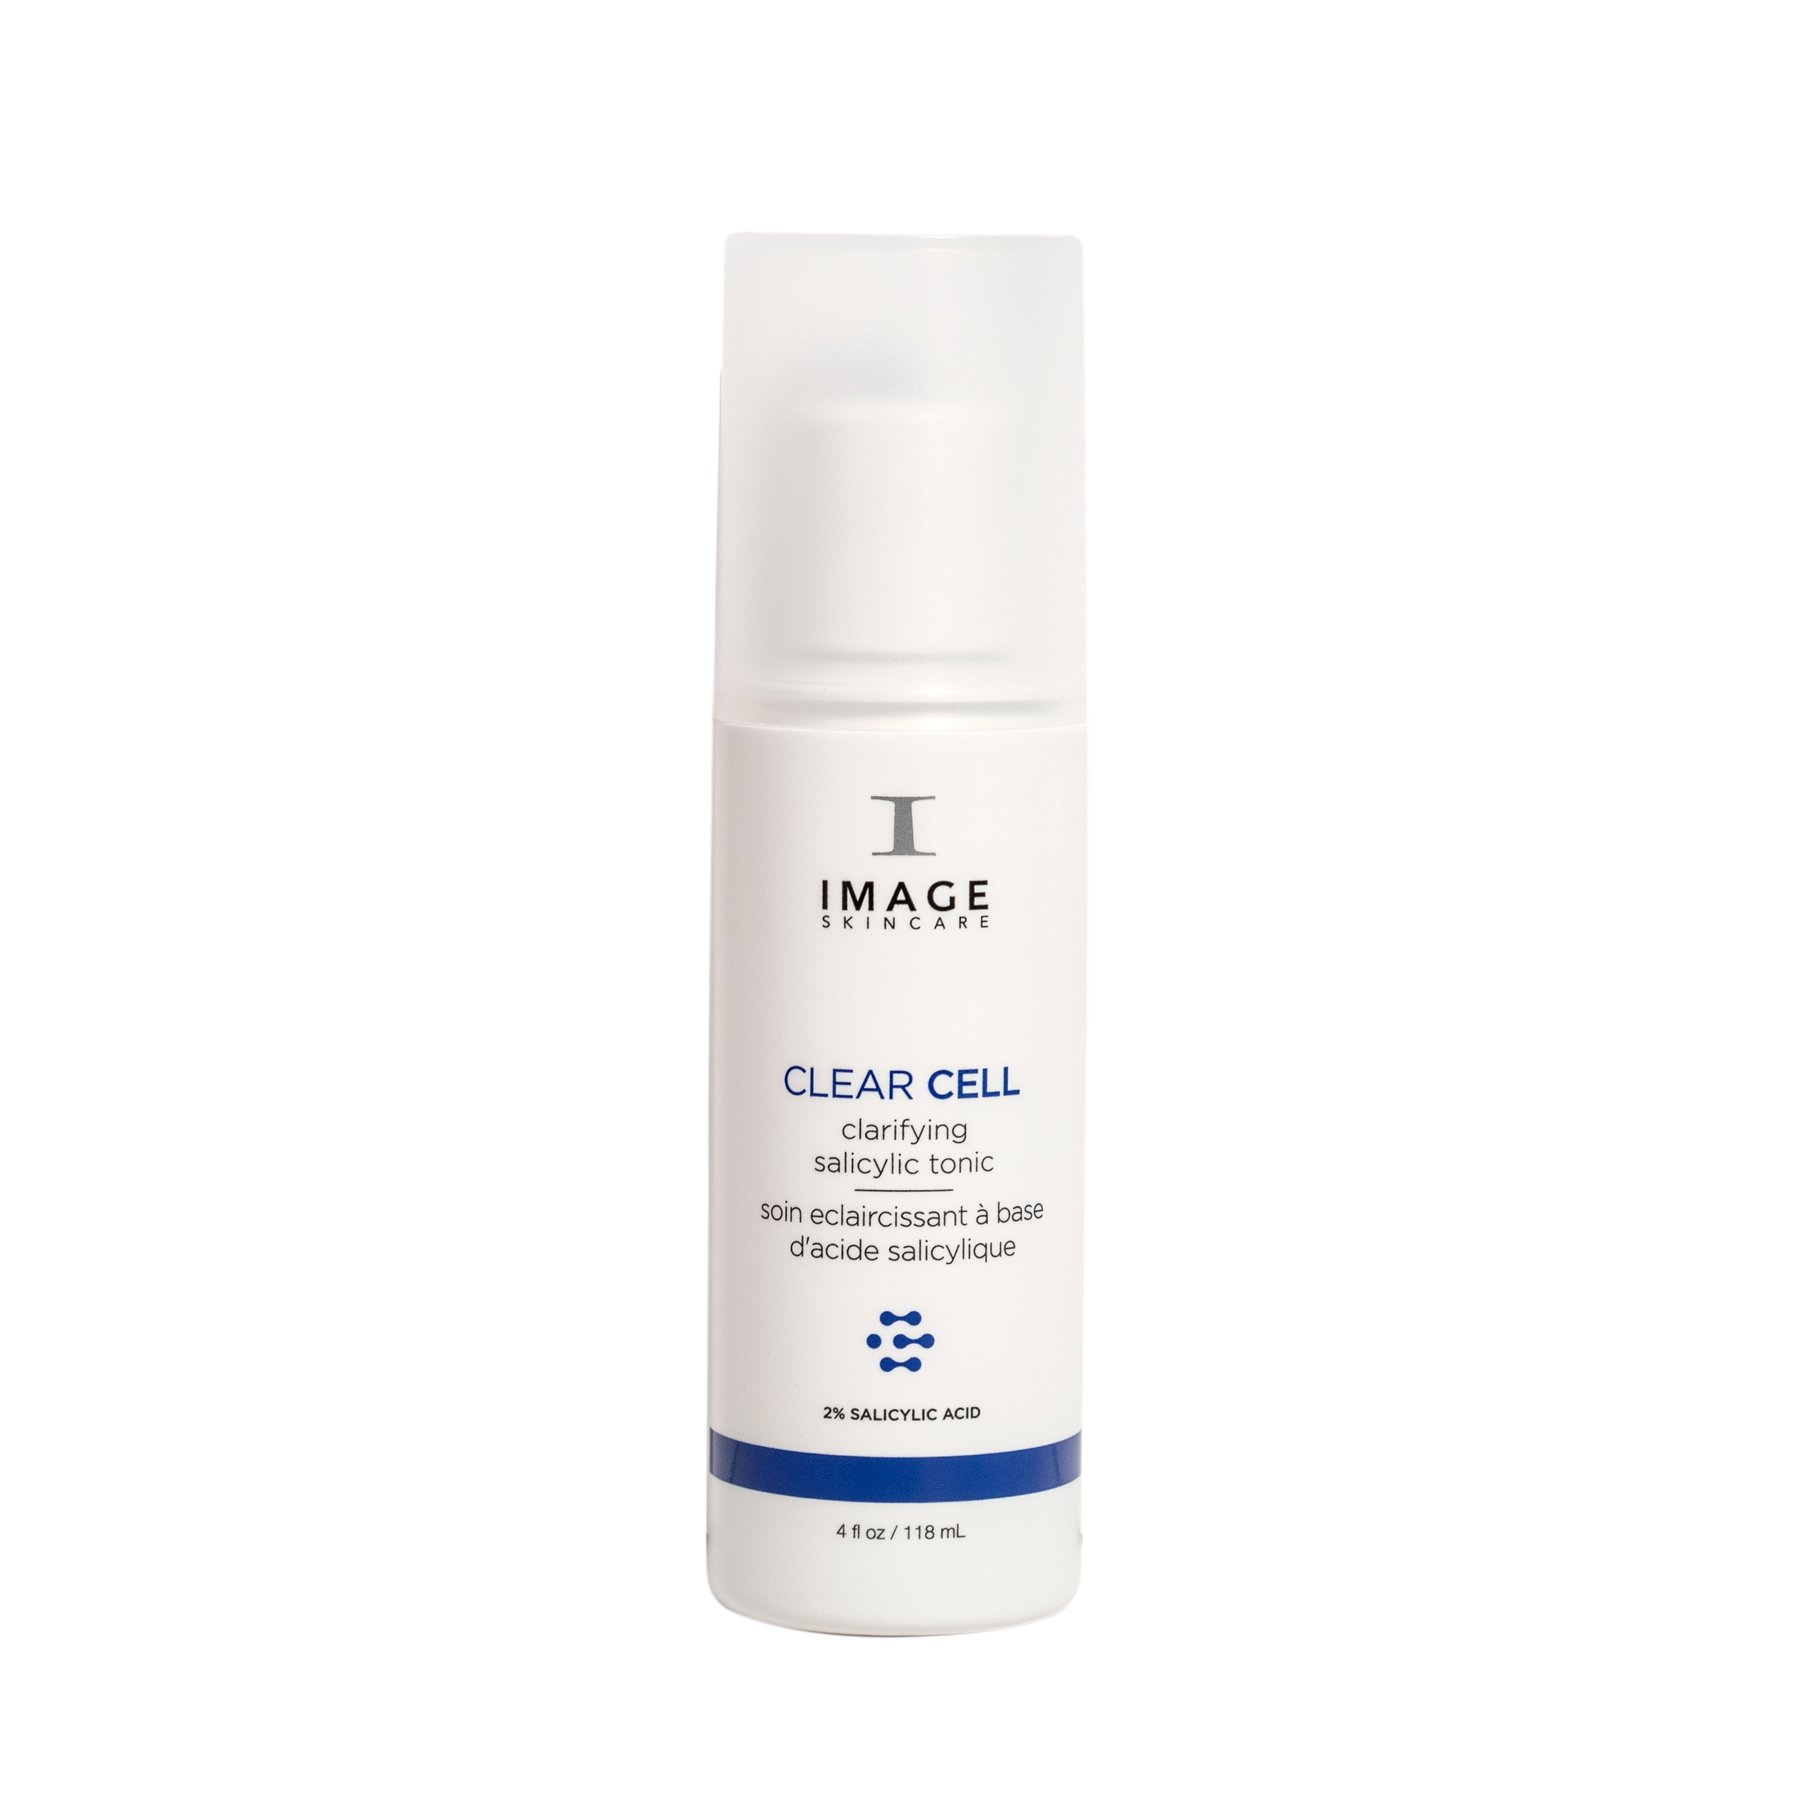 Image Vital c Hydrating Cleanser 177ml. Clear Cell Salicylic Gel Cleanser. Mad Salicylic Cleansing Gel. Clear Cell image набор.